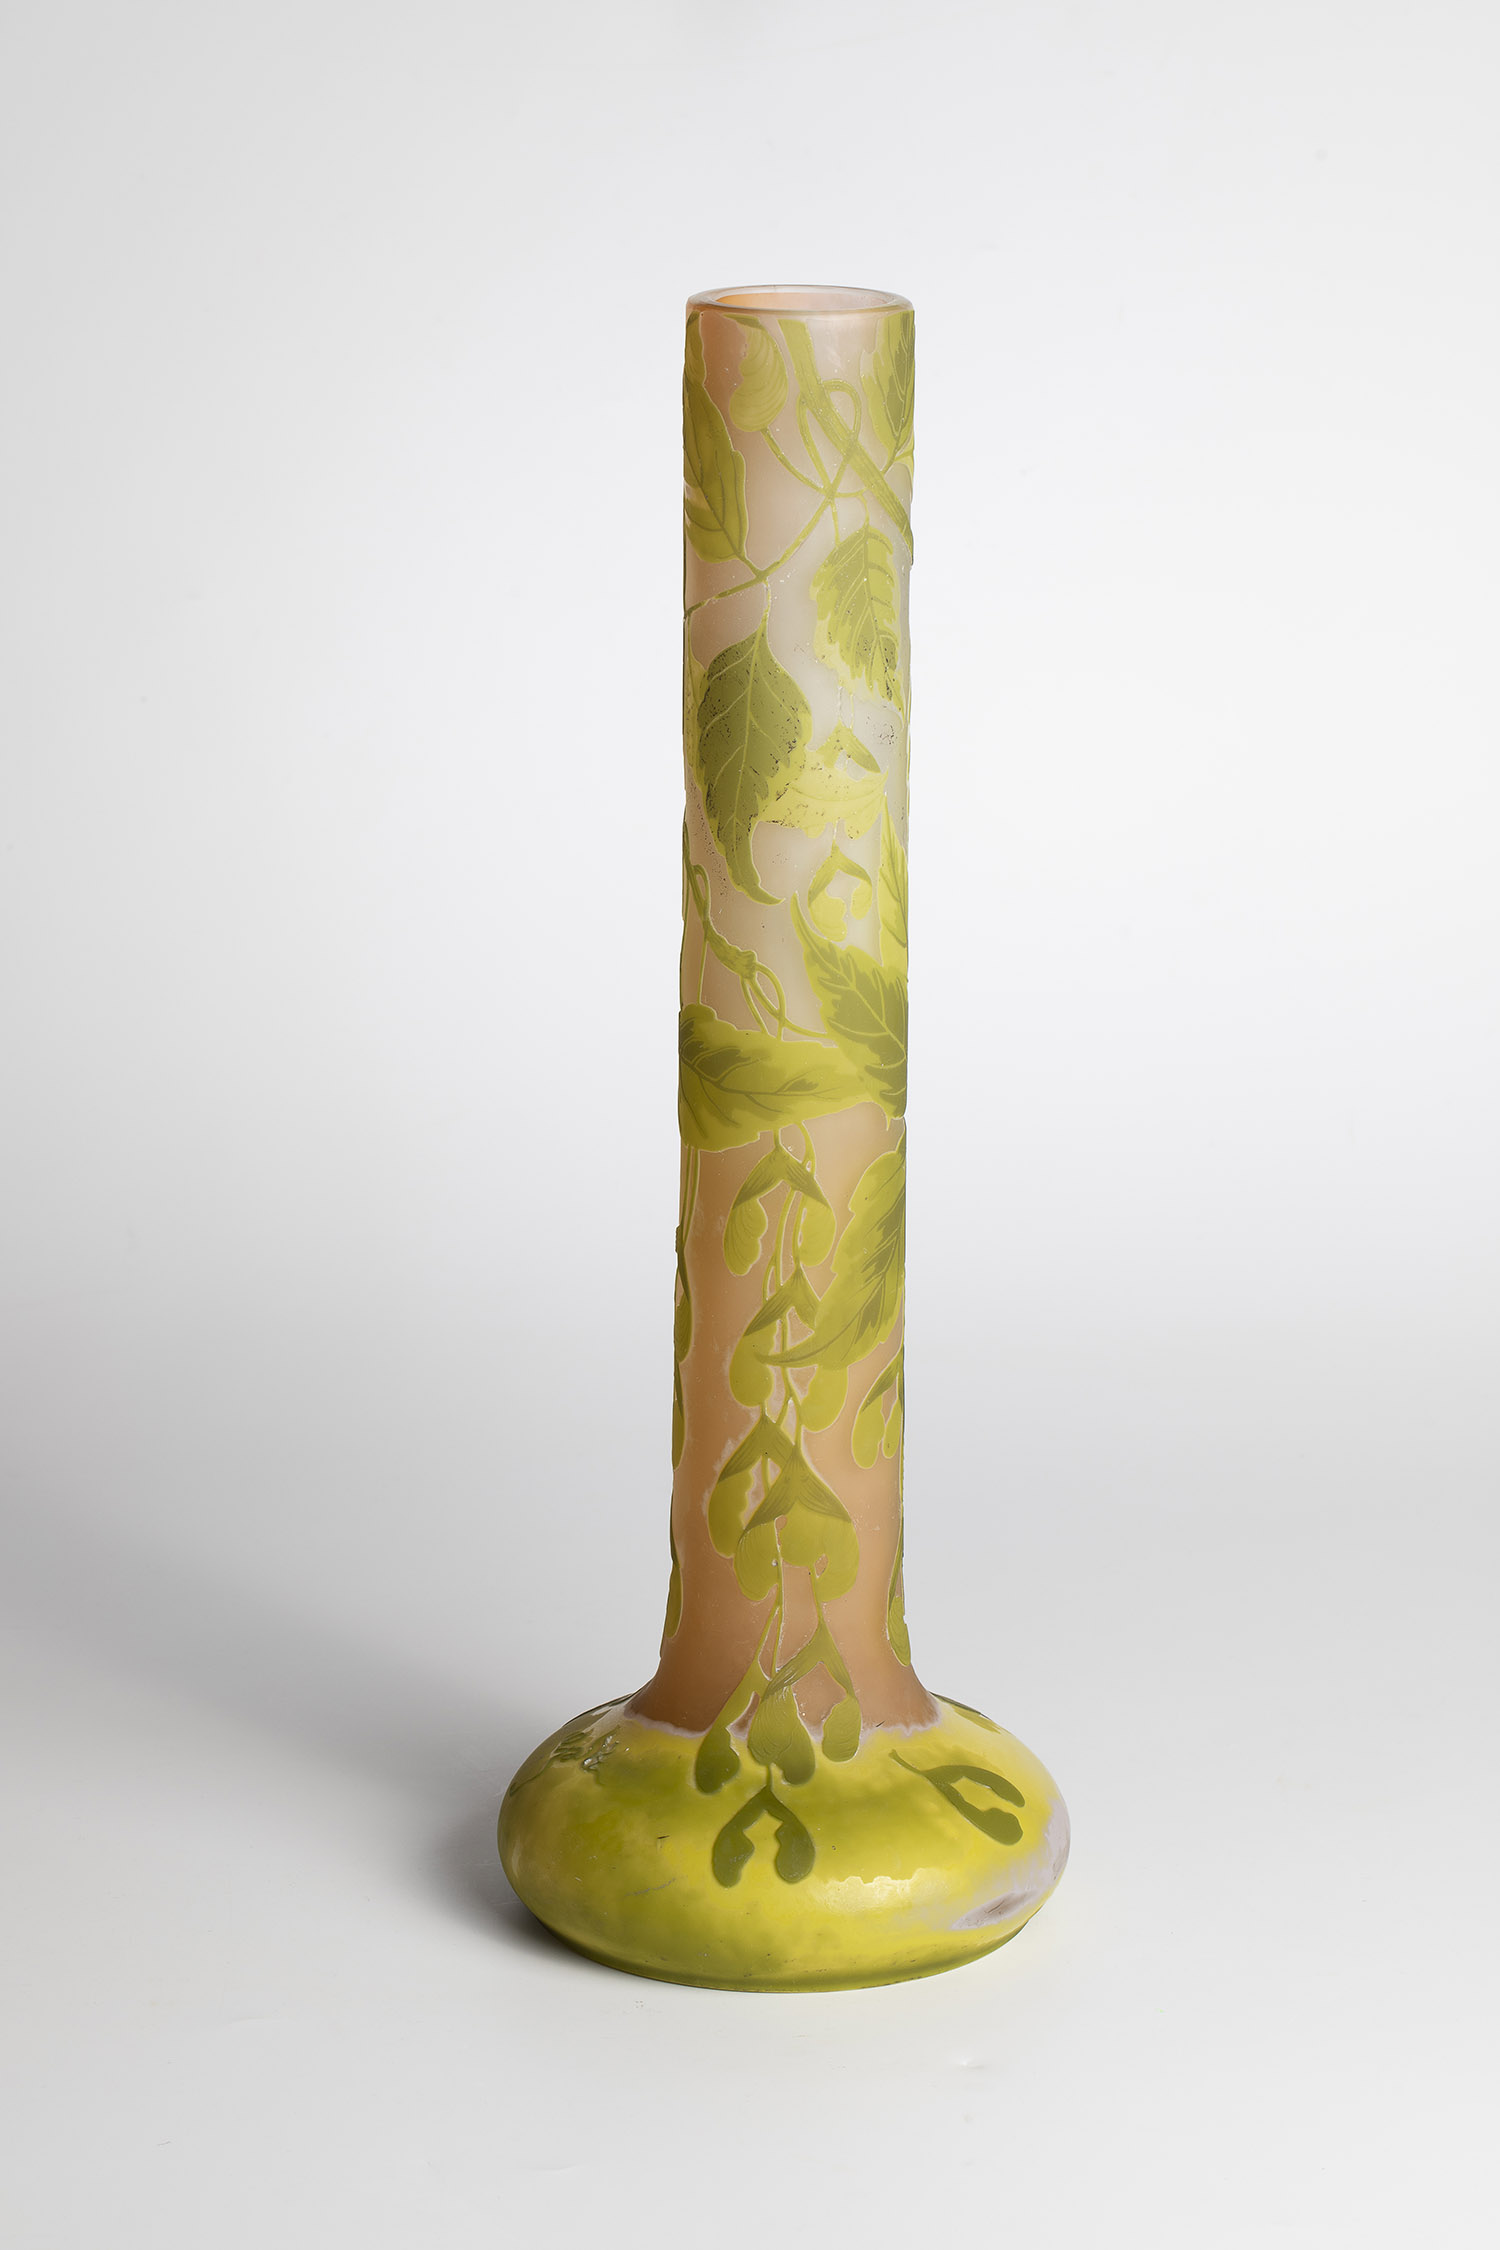 Pole Vase with Maple Emile Galle, Nancy, ca. 1900 Colourless glass, partially covered with orange- - Image 2 of 3